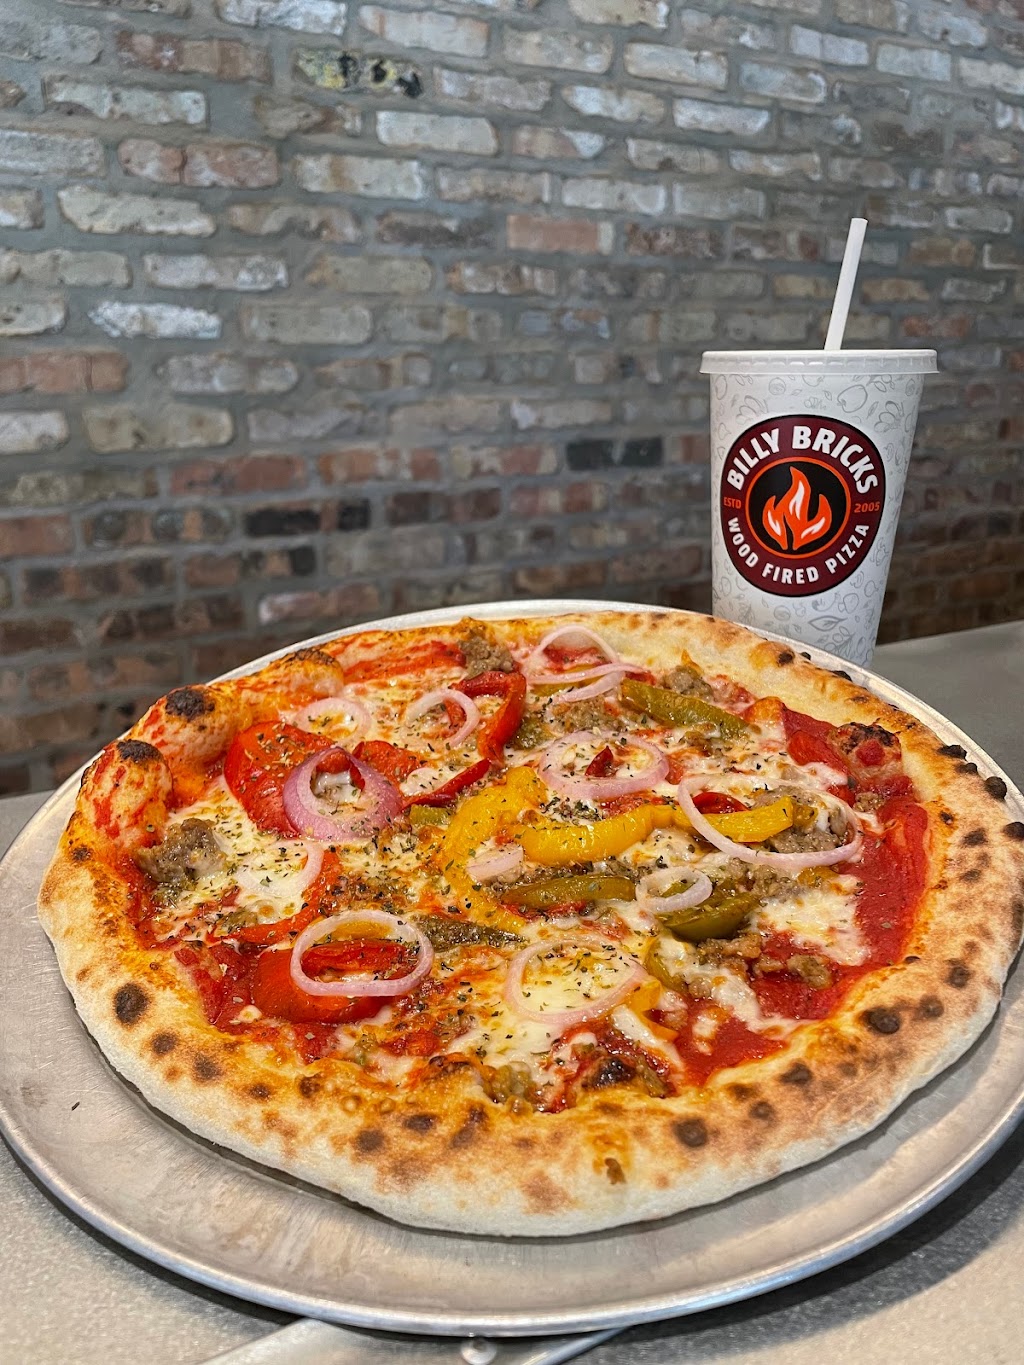 Bricks Wood Fired Pizza - Yorktown Lombard | 2770 S Highland Ave #7130, Lombard, IL 60148 | Phone: (630) 613-8830